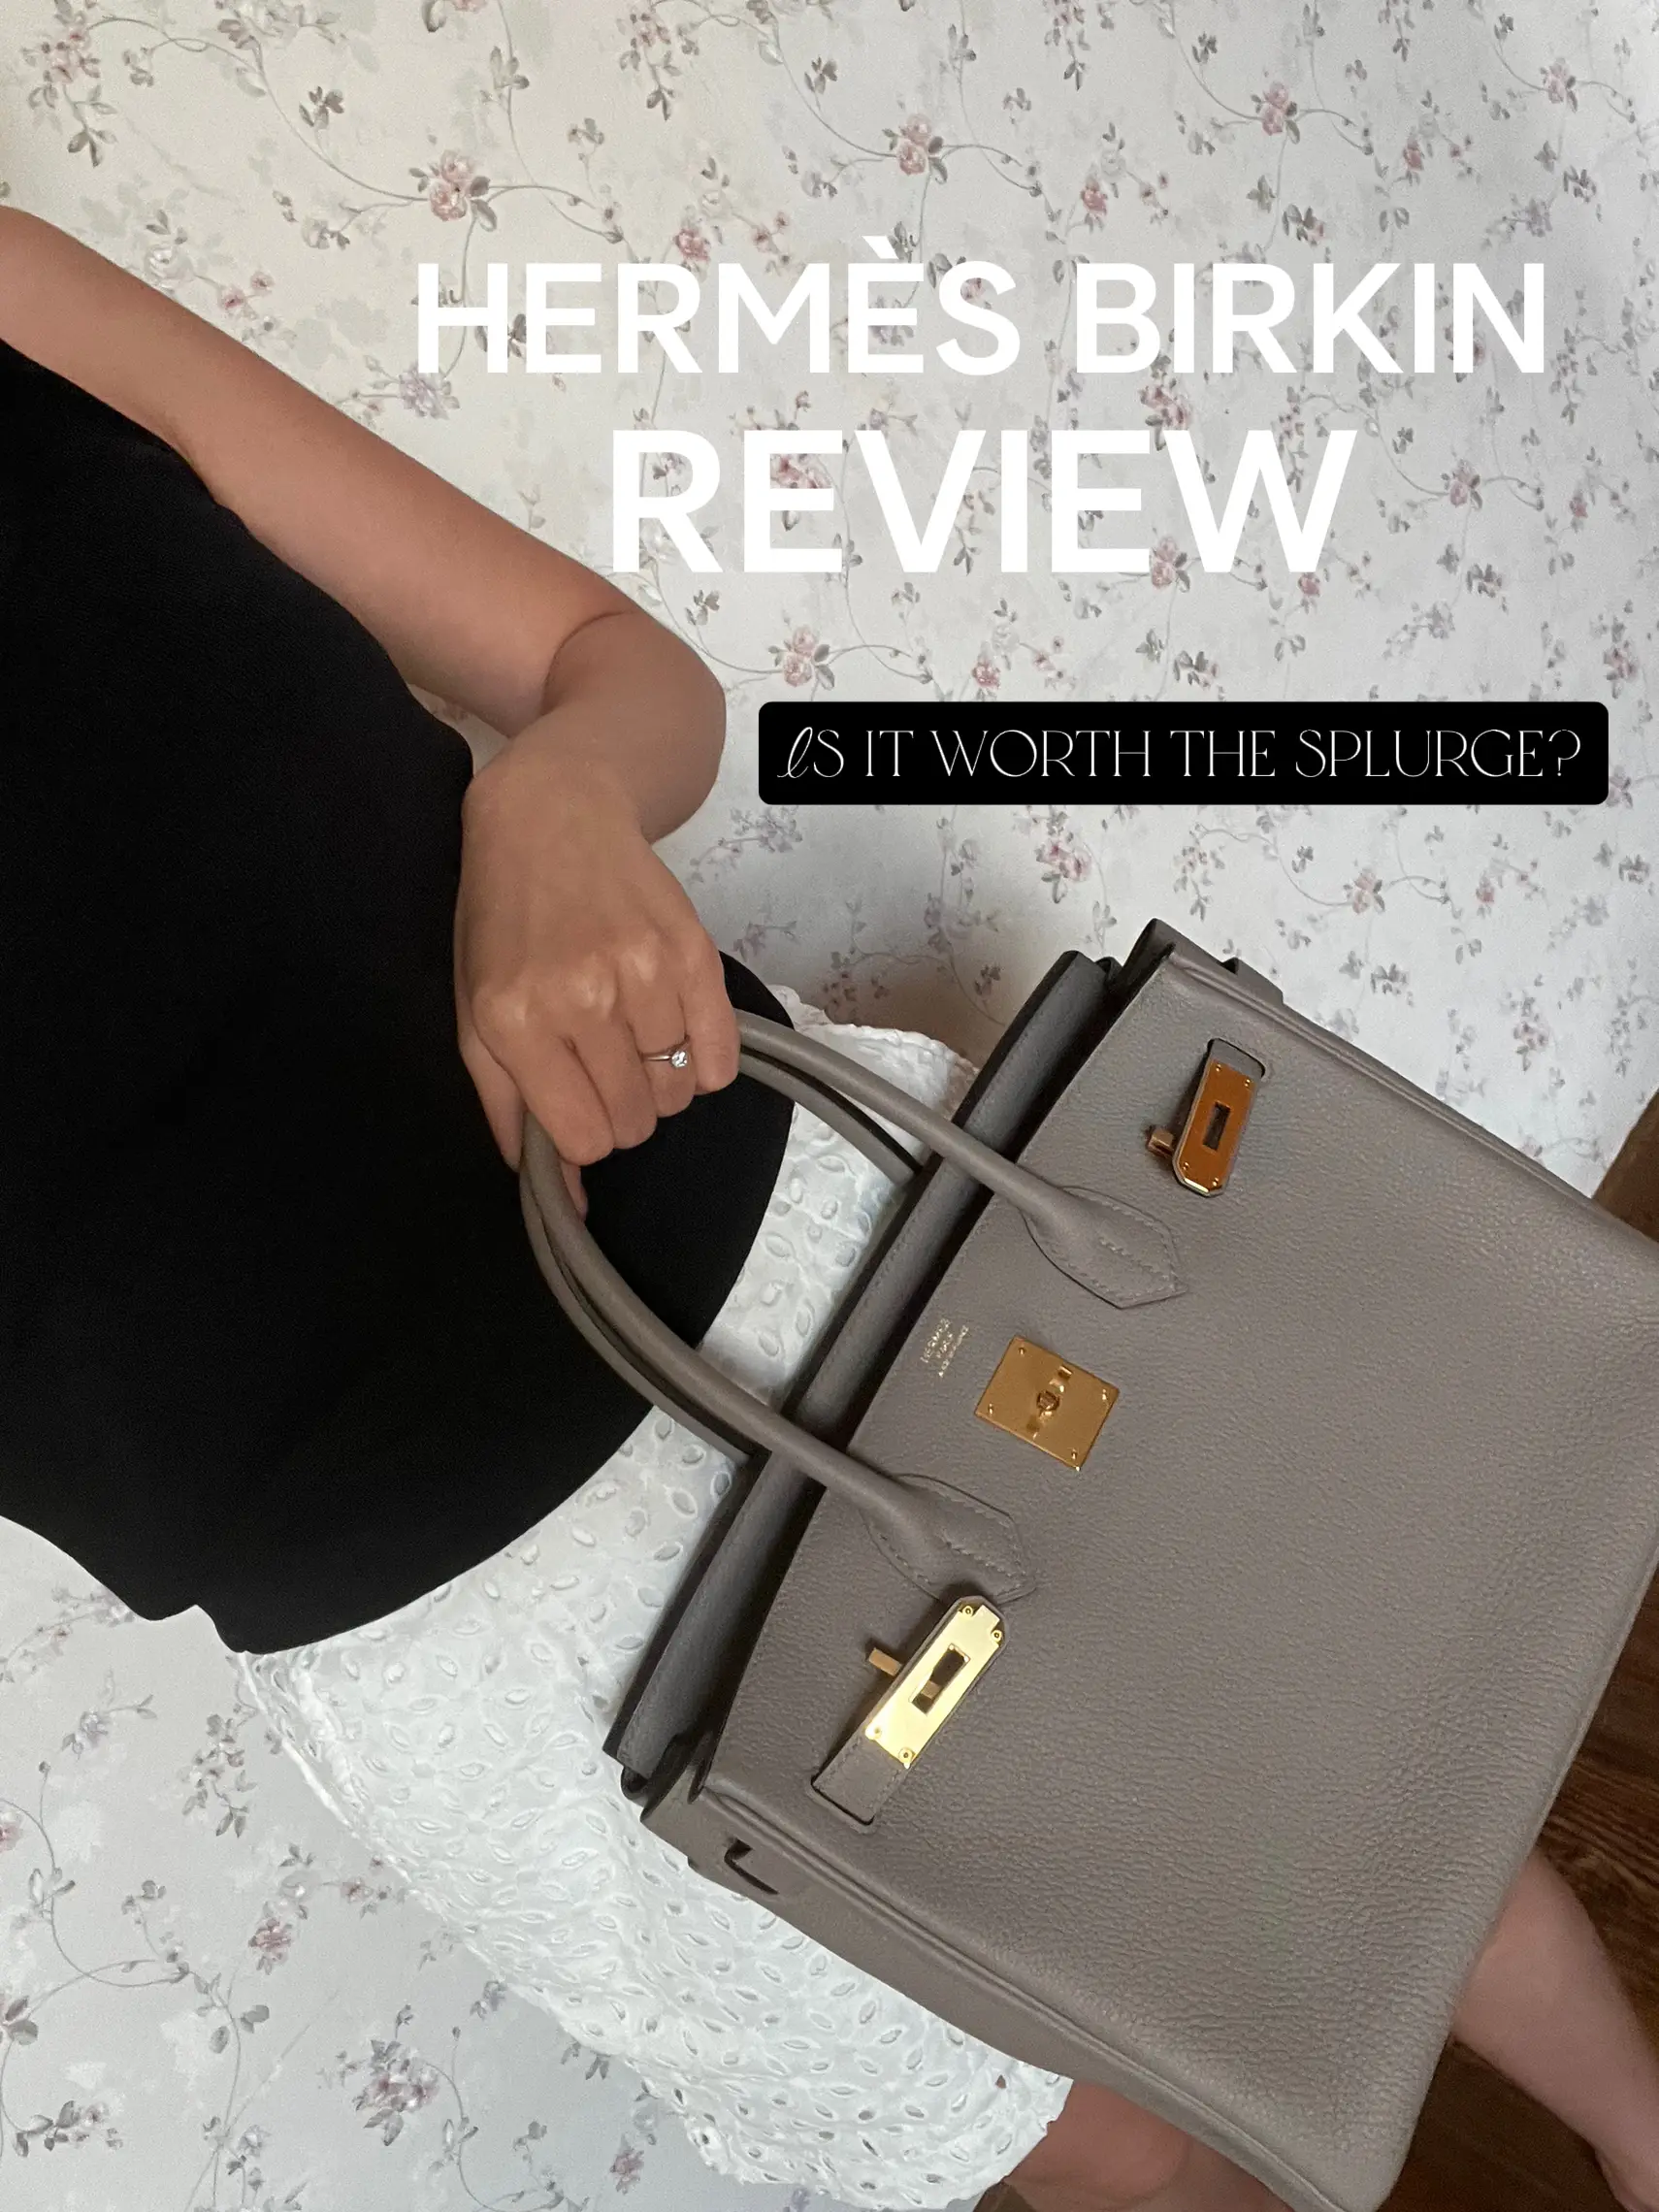 A subtle touch of luxury - this Hermes bag charm is the perfect finish